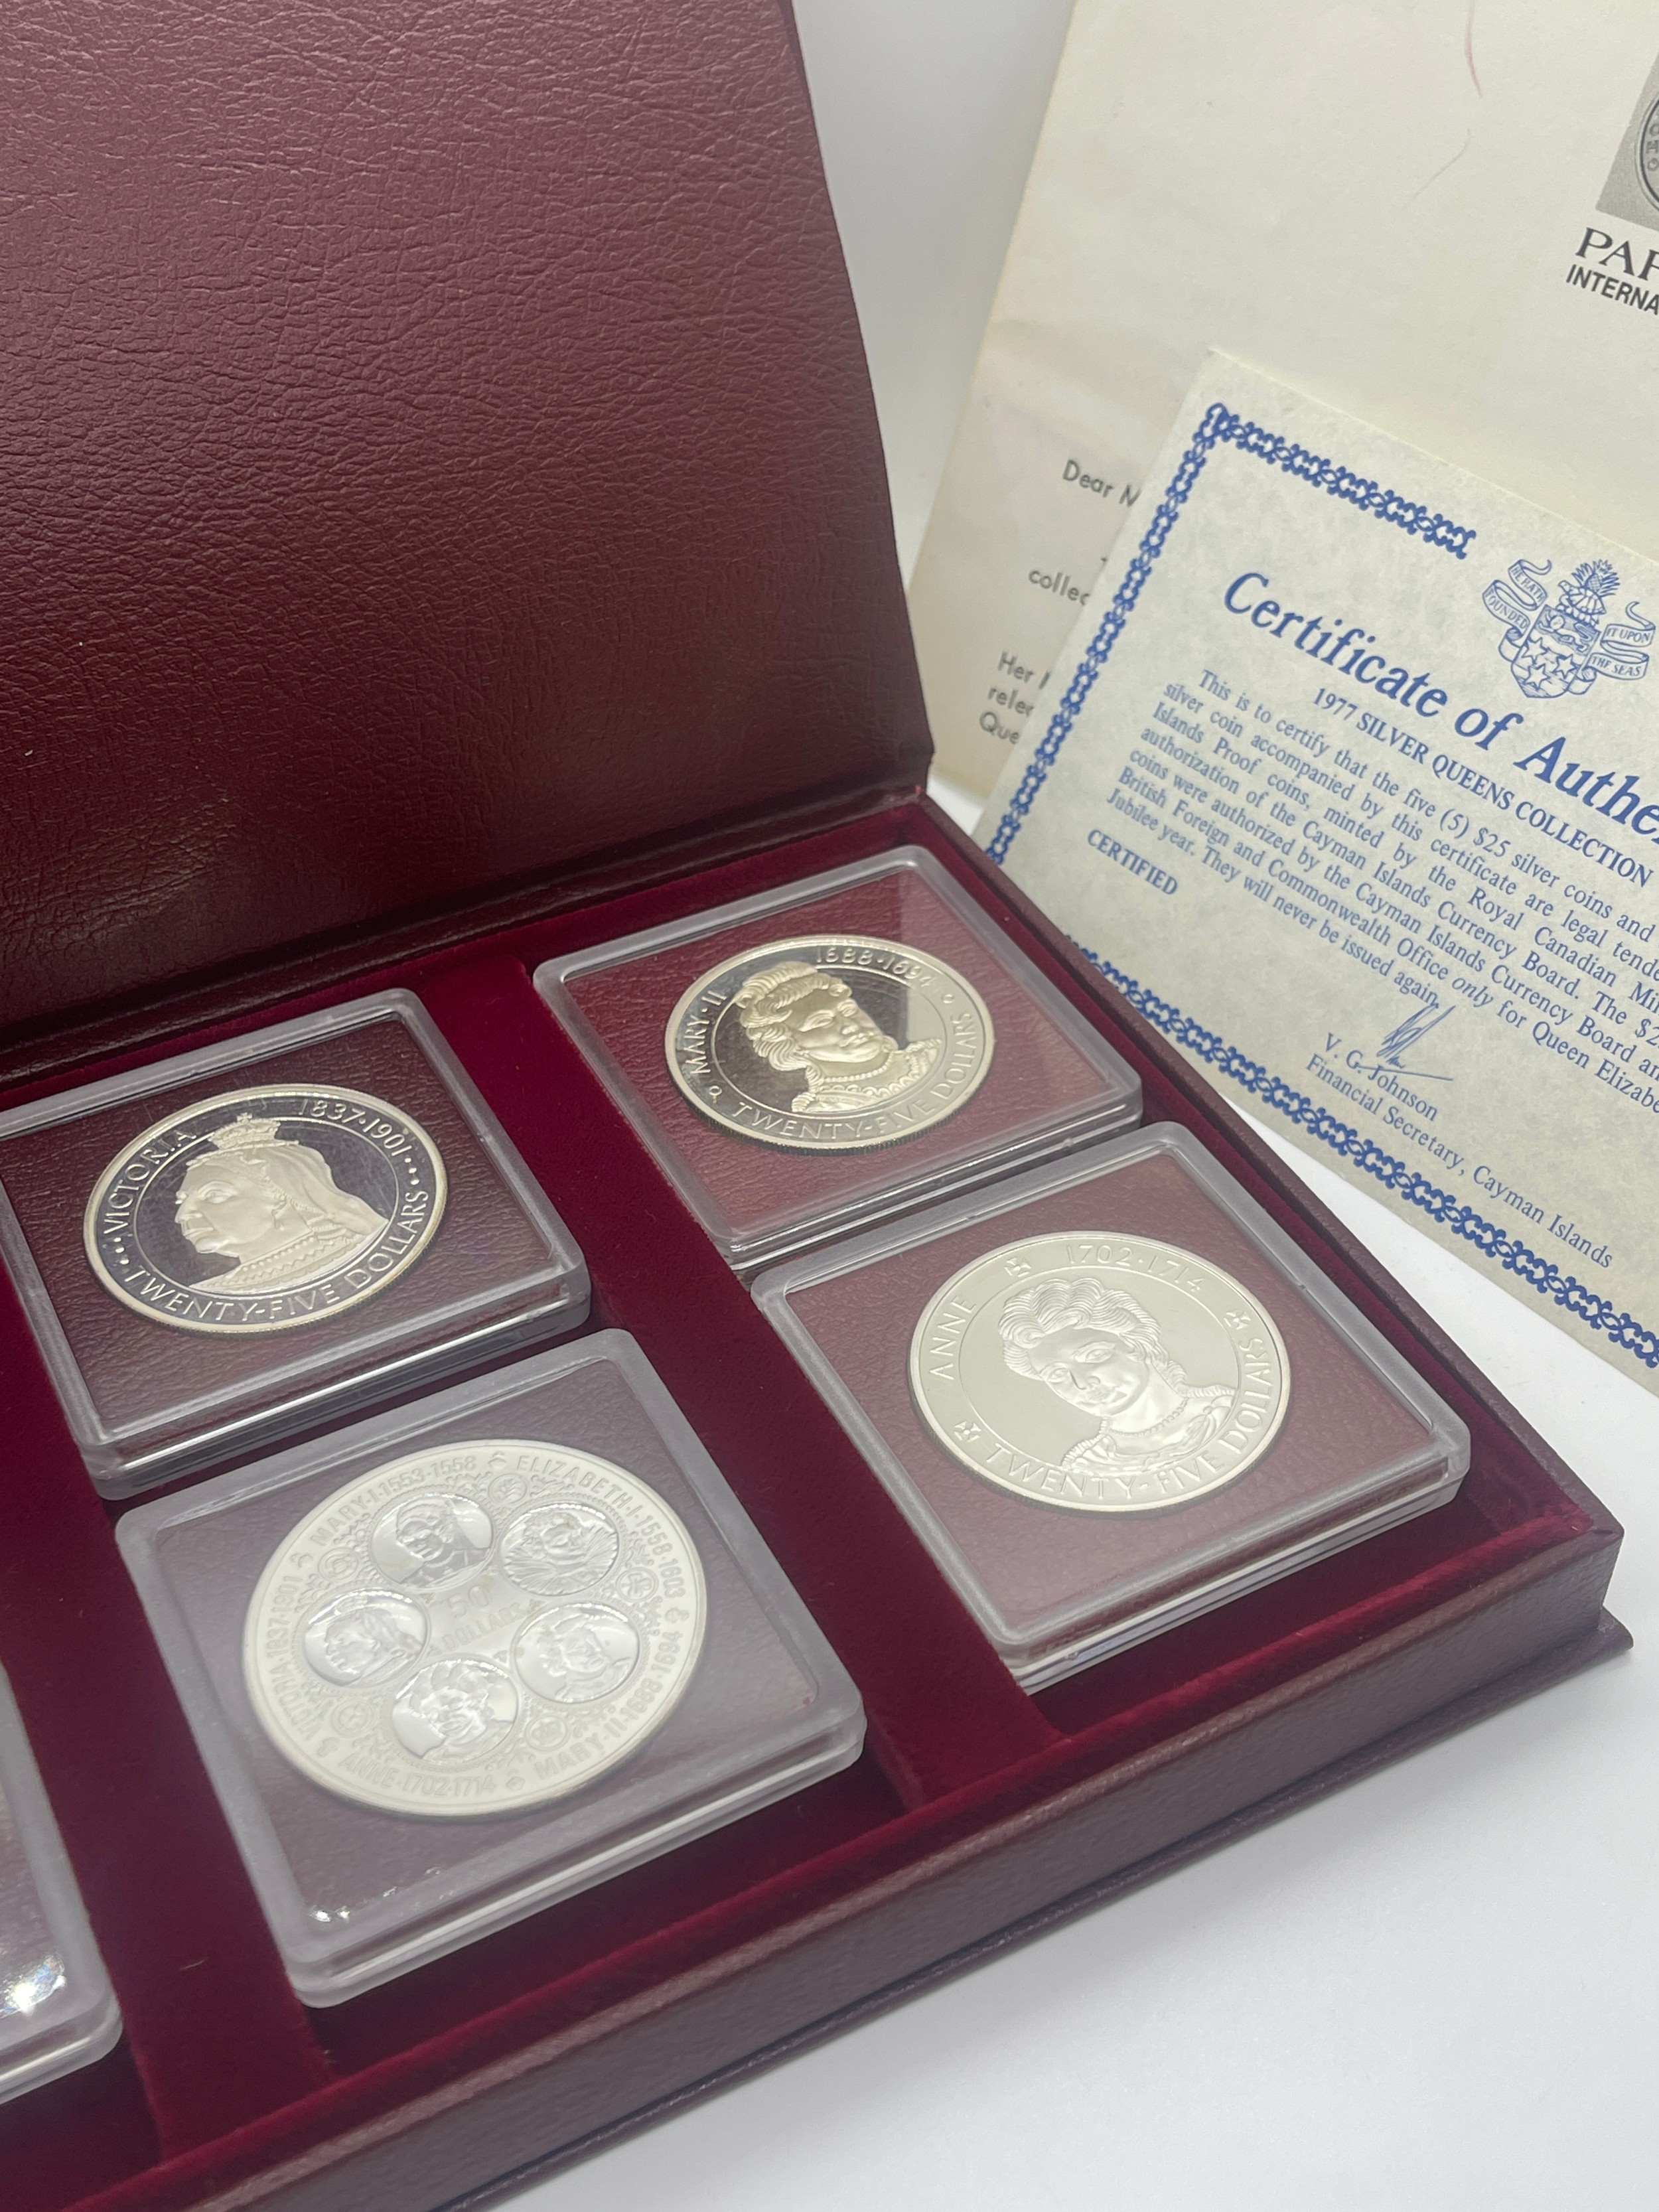 Boxed the Cayman island silver queens collection 1977 coin set with COA - Image 4 of 5